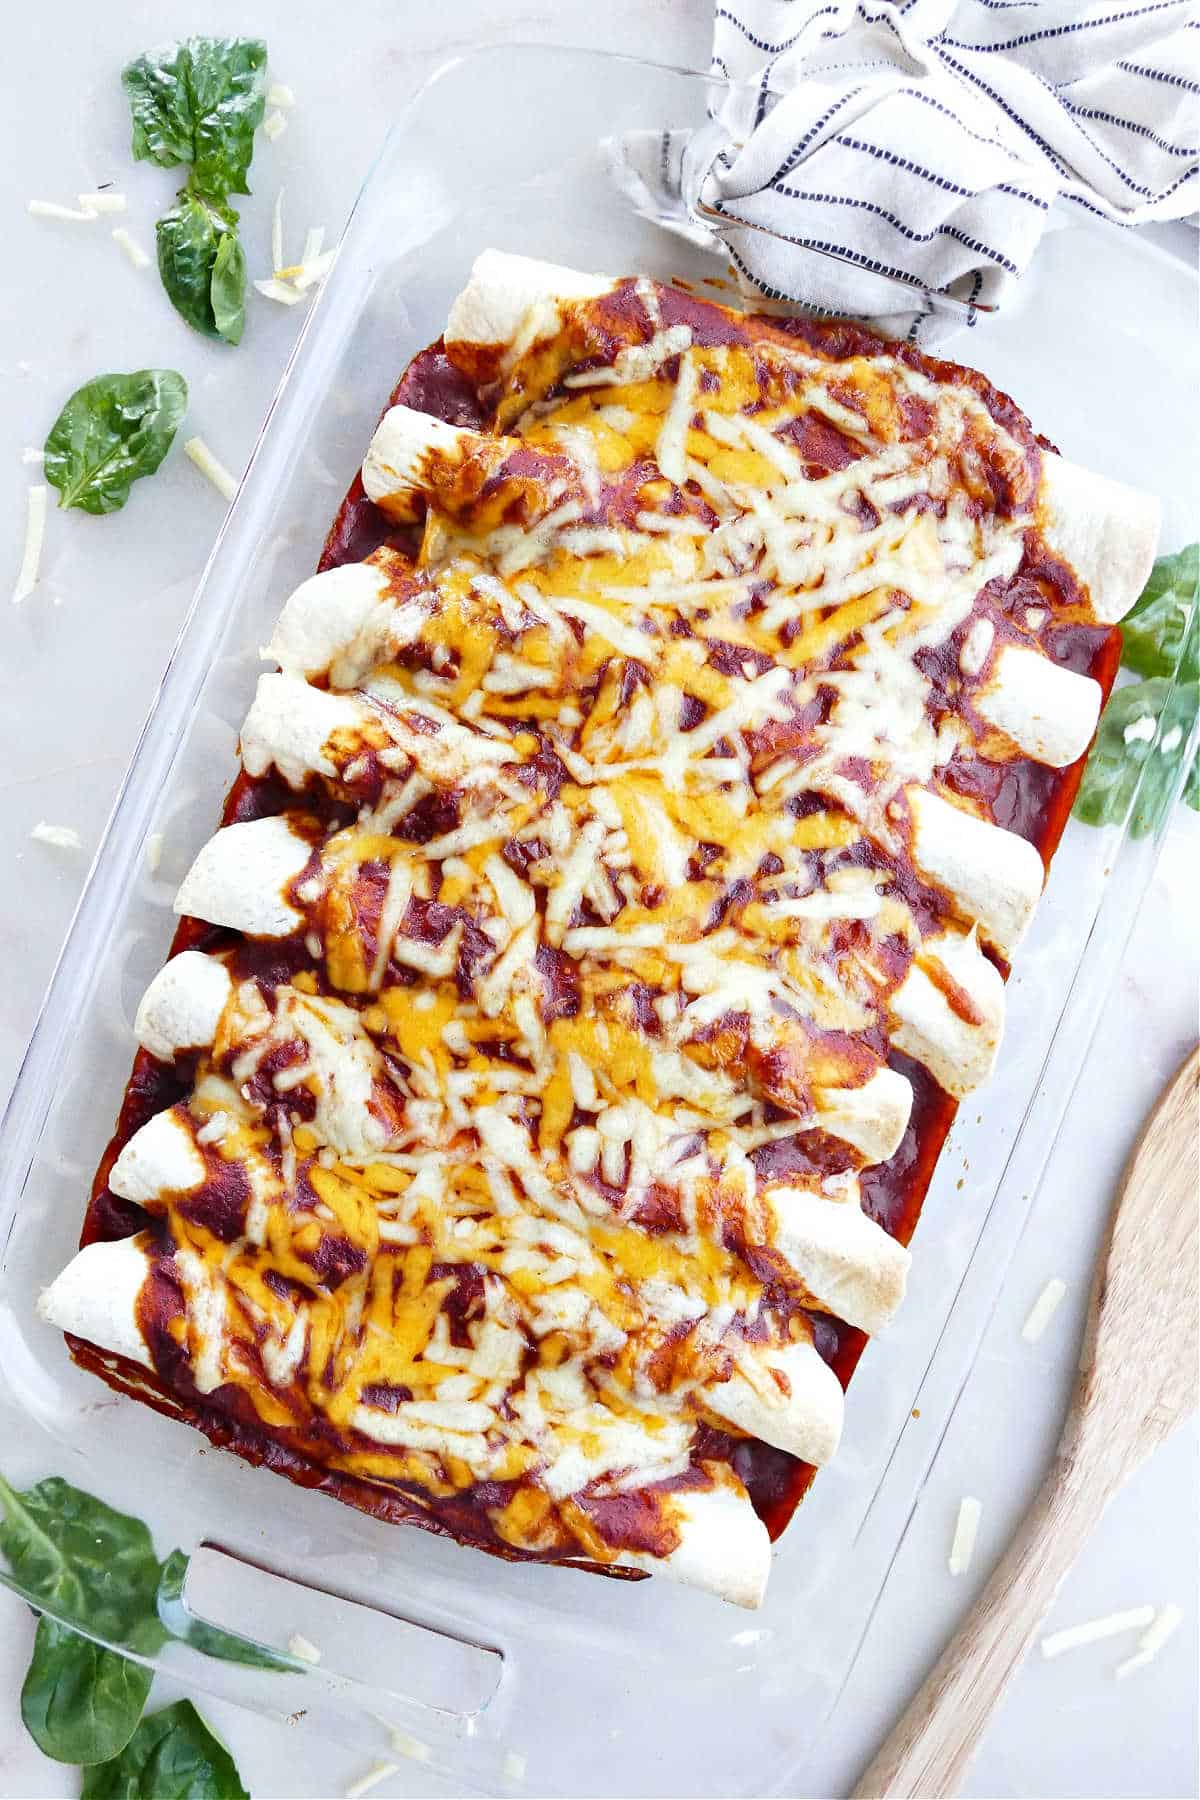 black bean and spinach enchiladas assembled in a rectangular baking dish on a counter